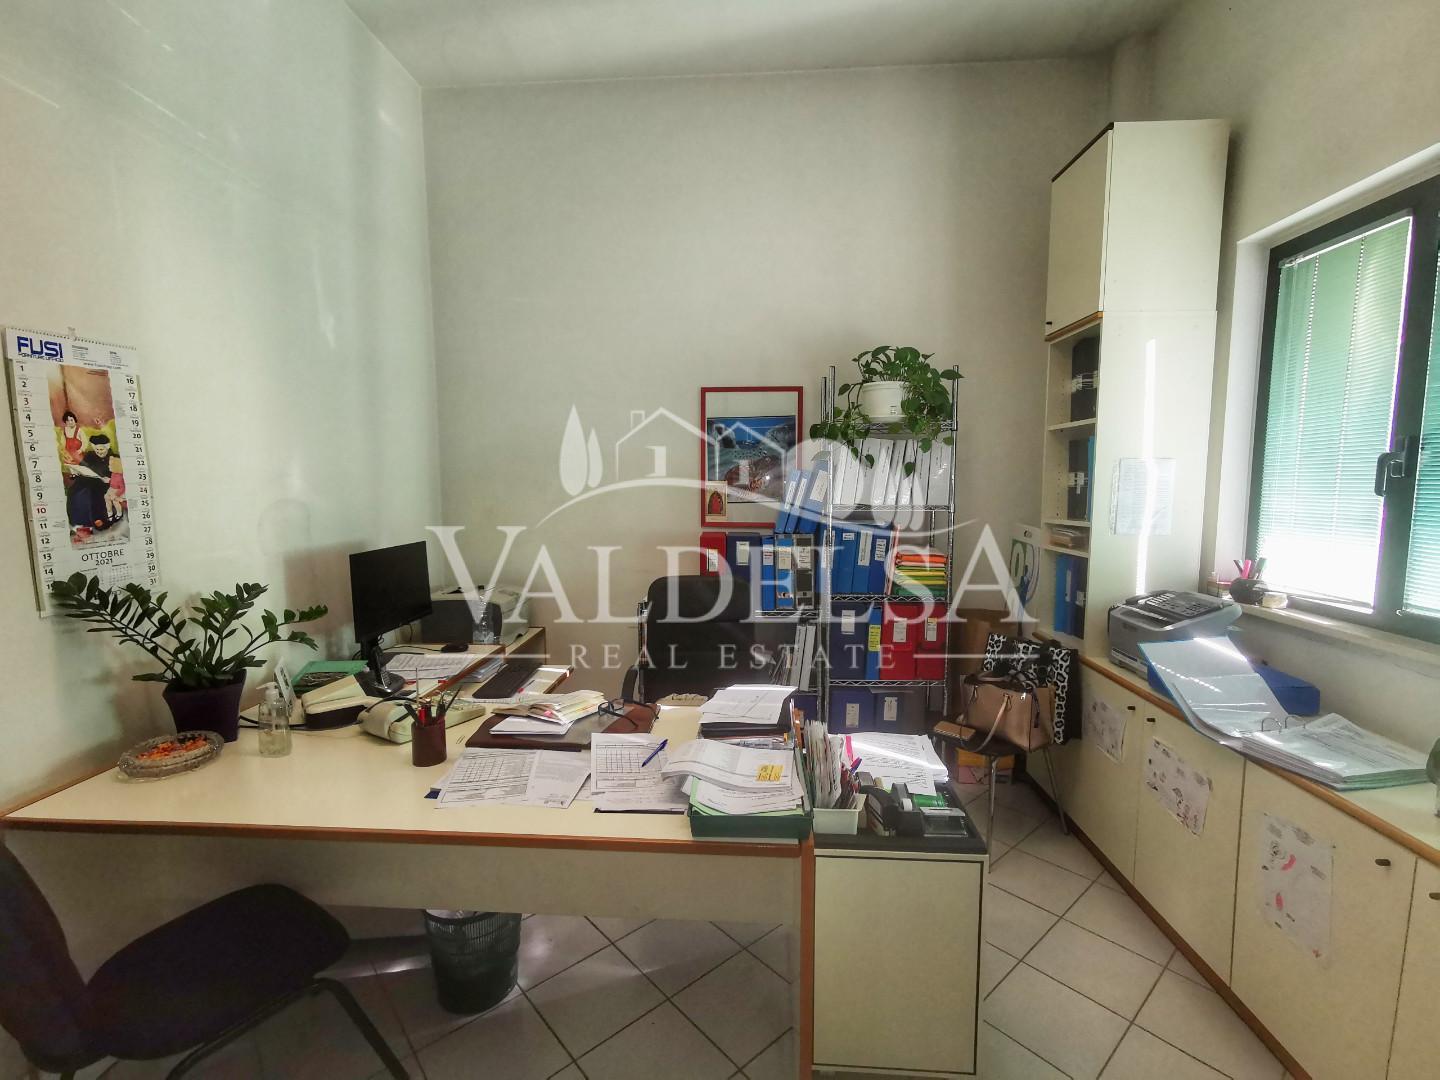 Office for sale, ref. 693